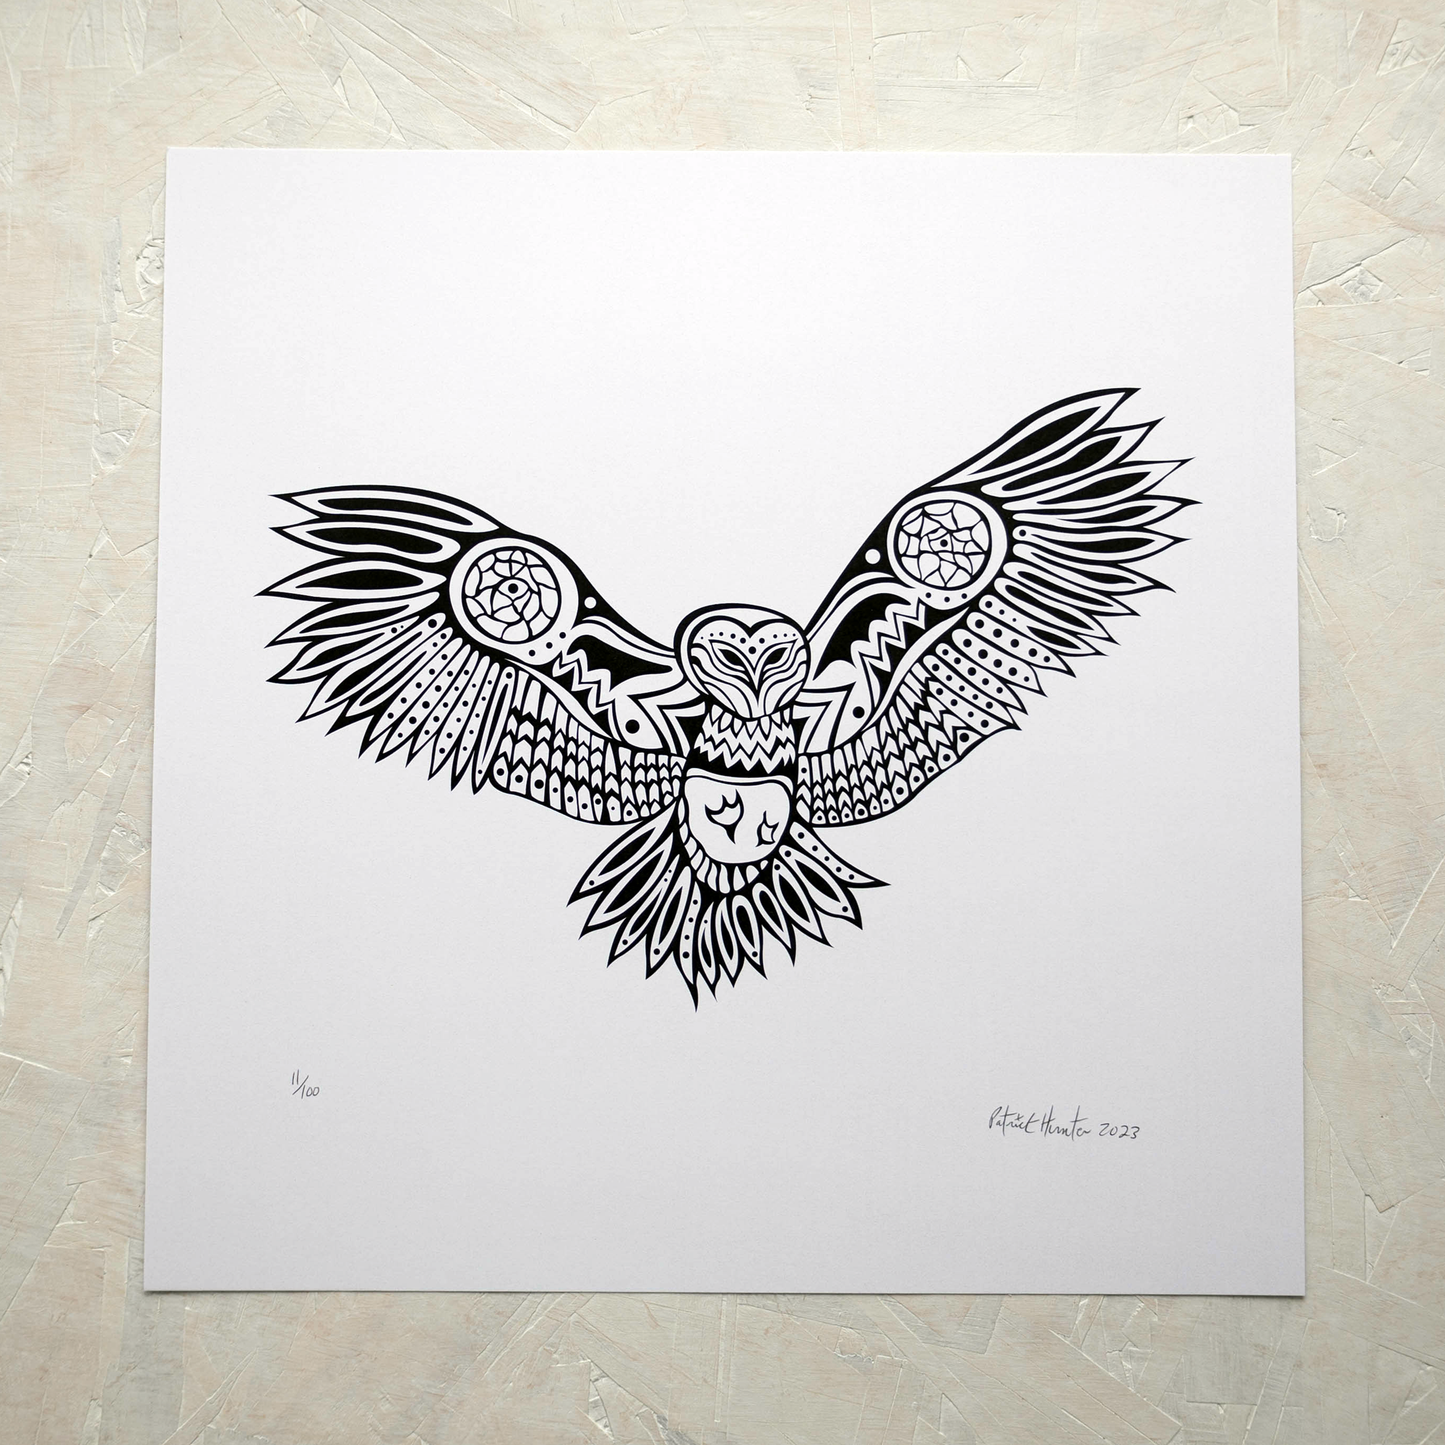 Print of Patrick Hunter's painting of an owl with outstretched wings in black on white, woodland art style.